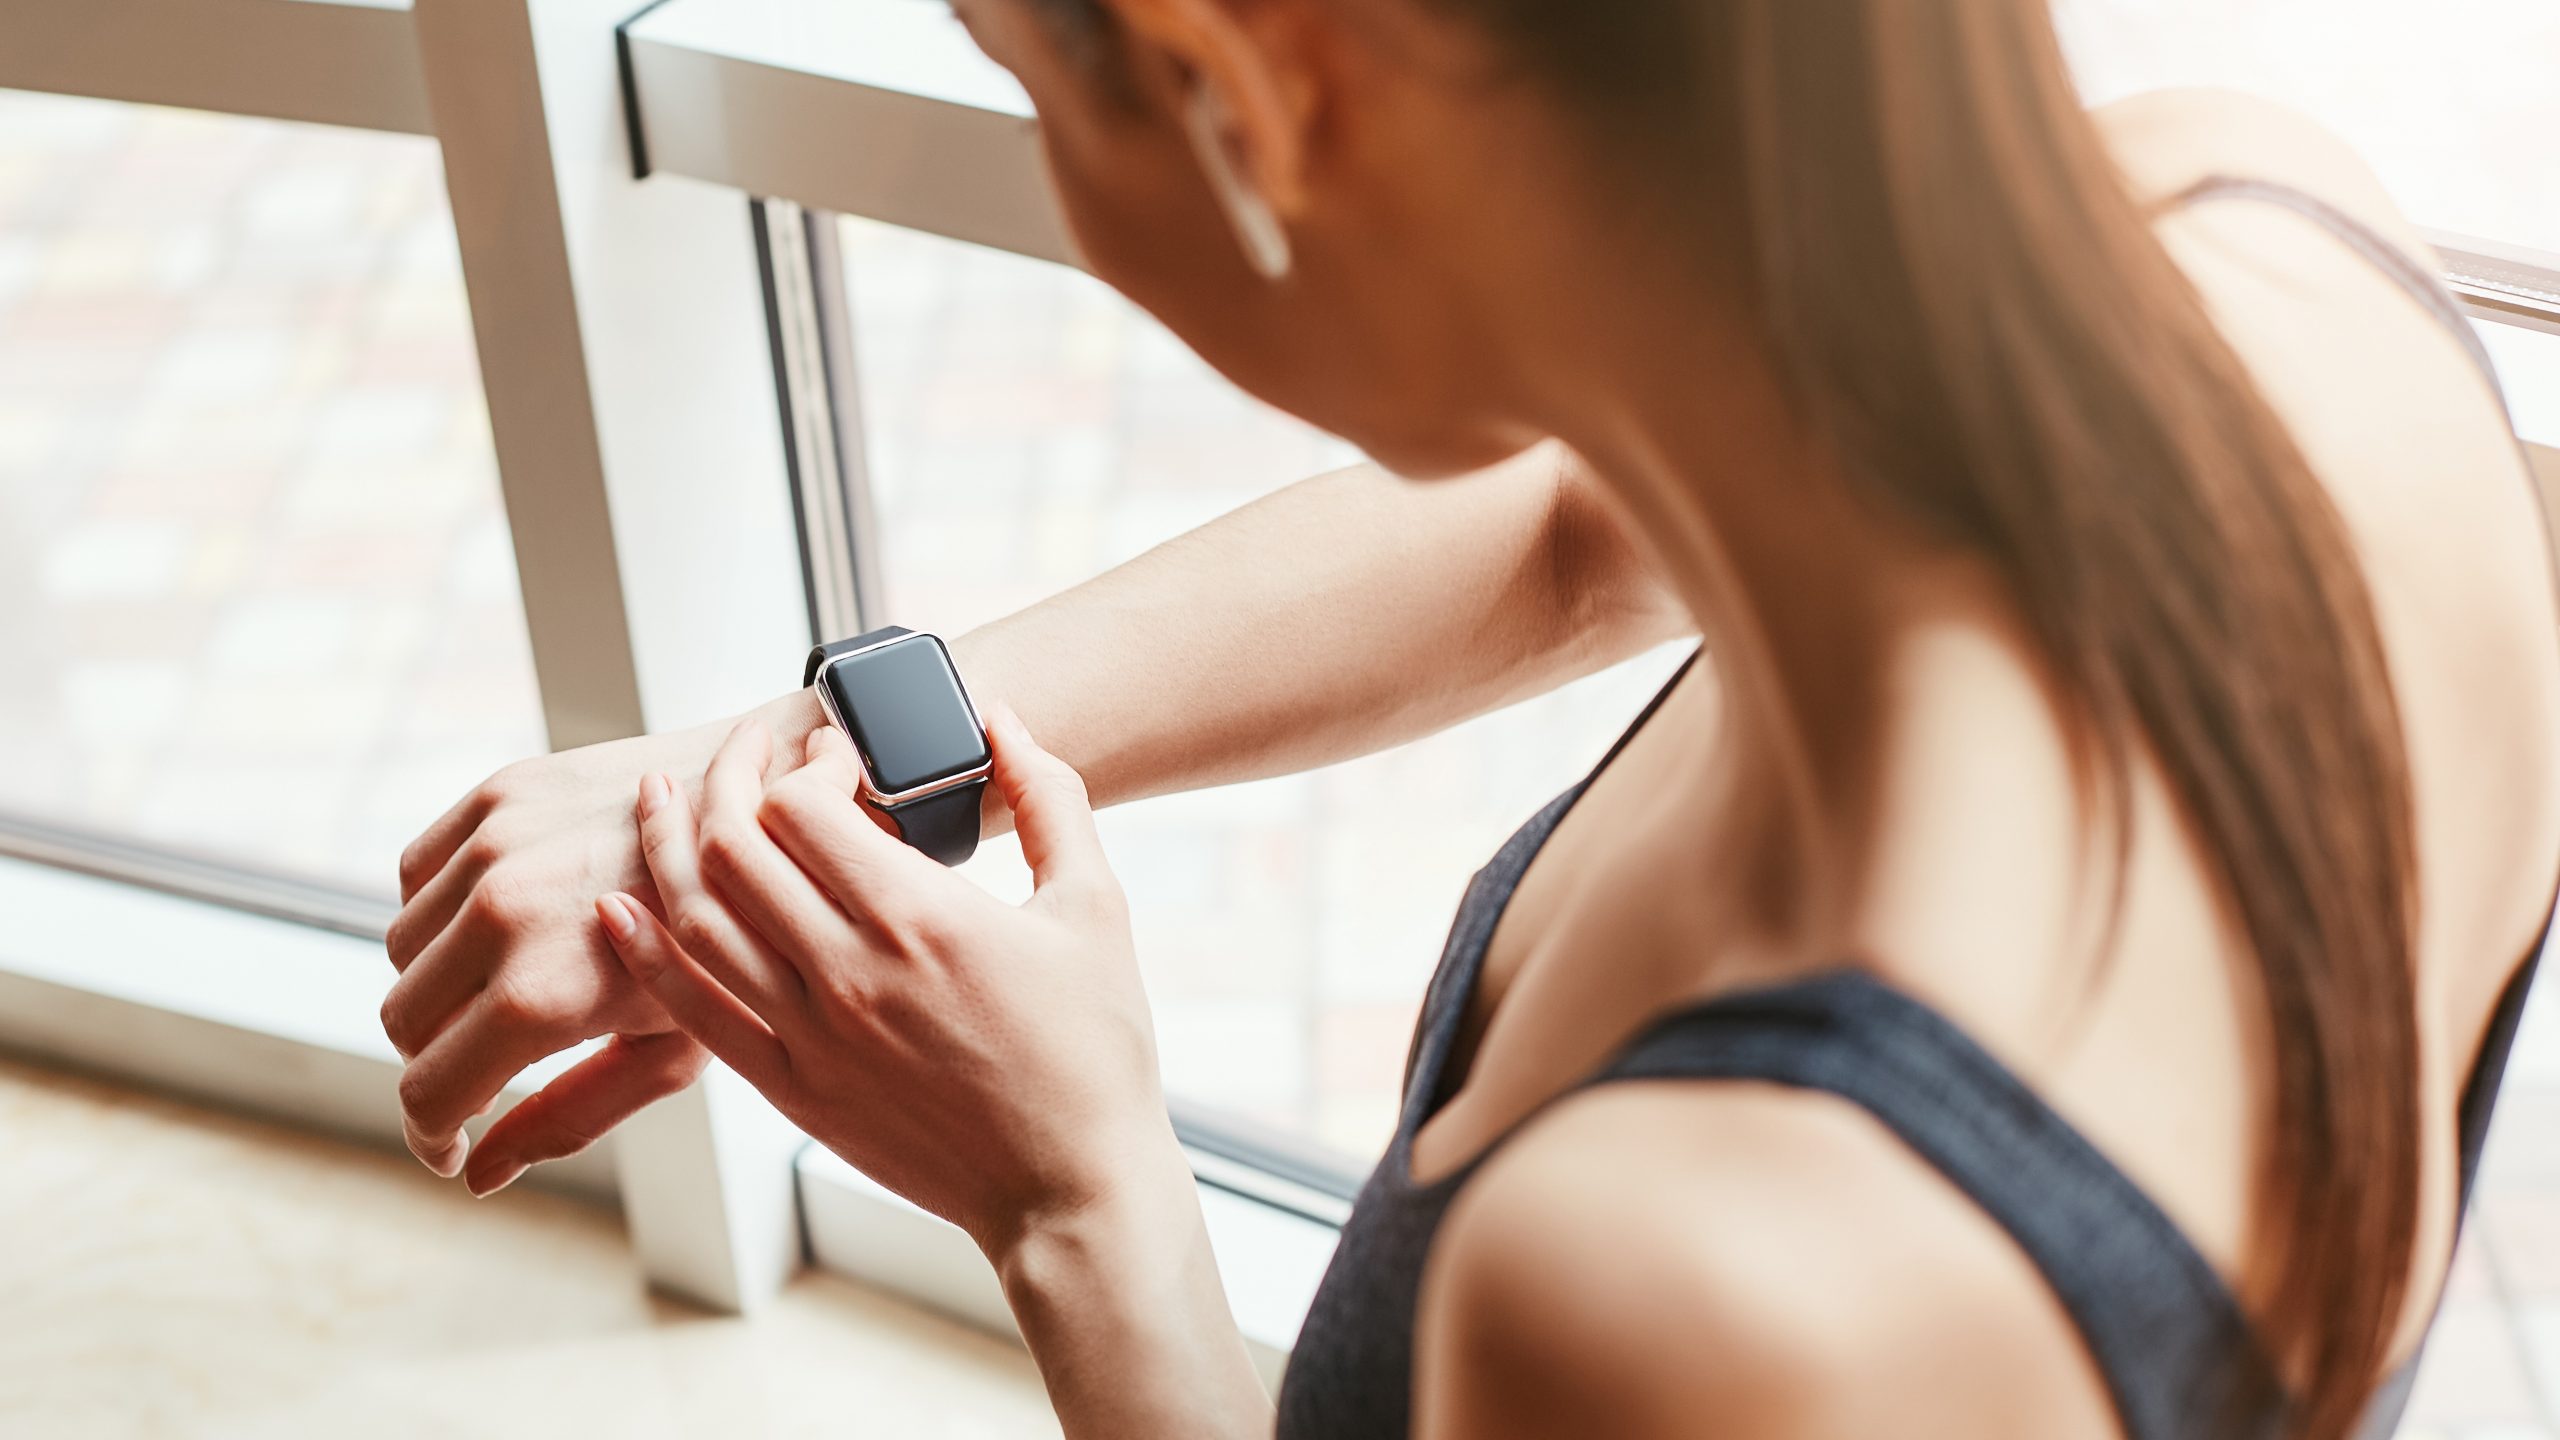 5 ways to stay healthy with an Apple Watch, Galaxy Watch or another smartwatch